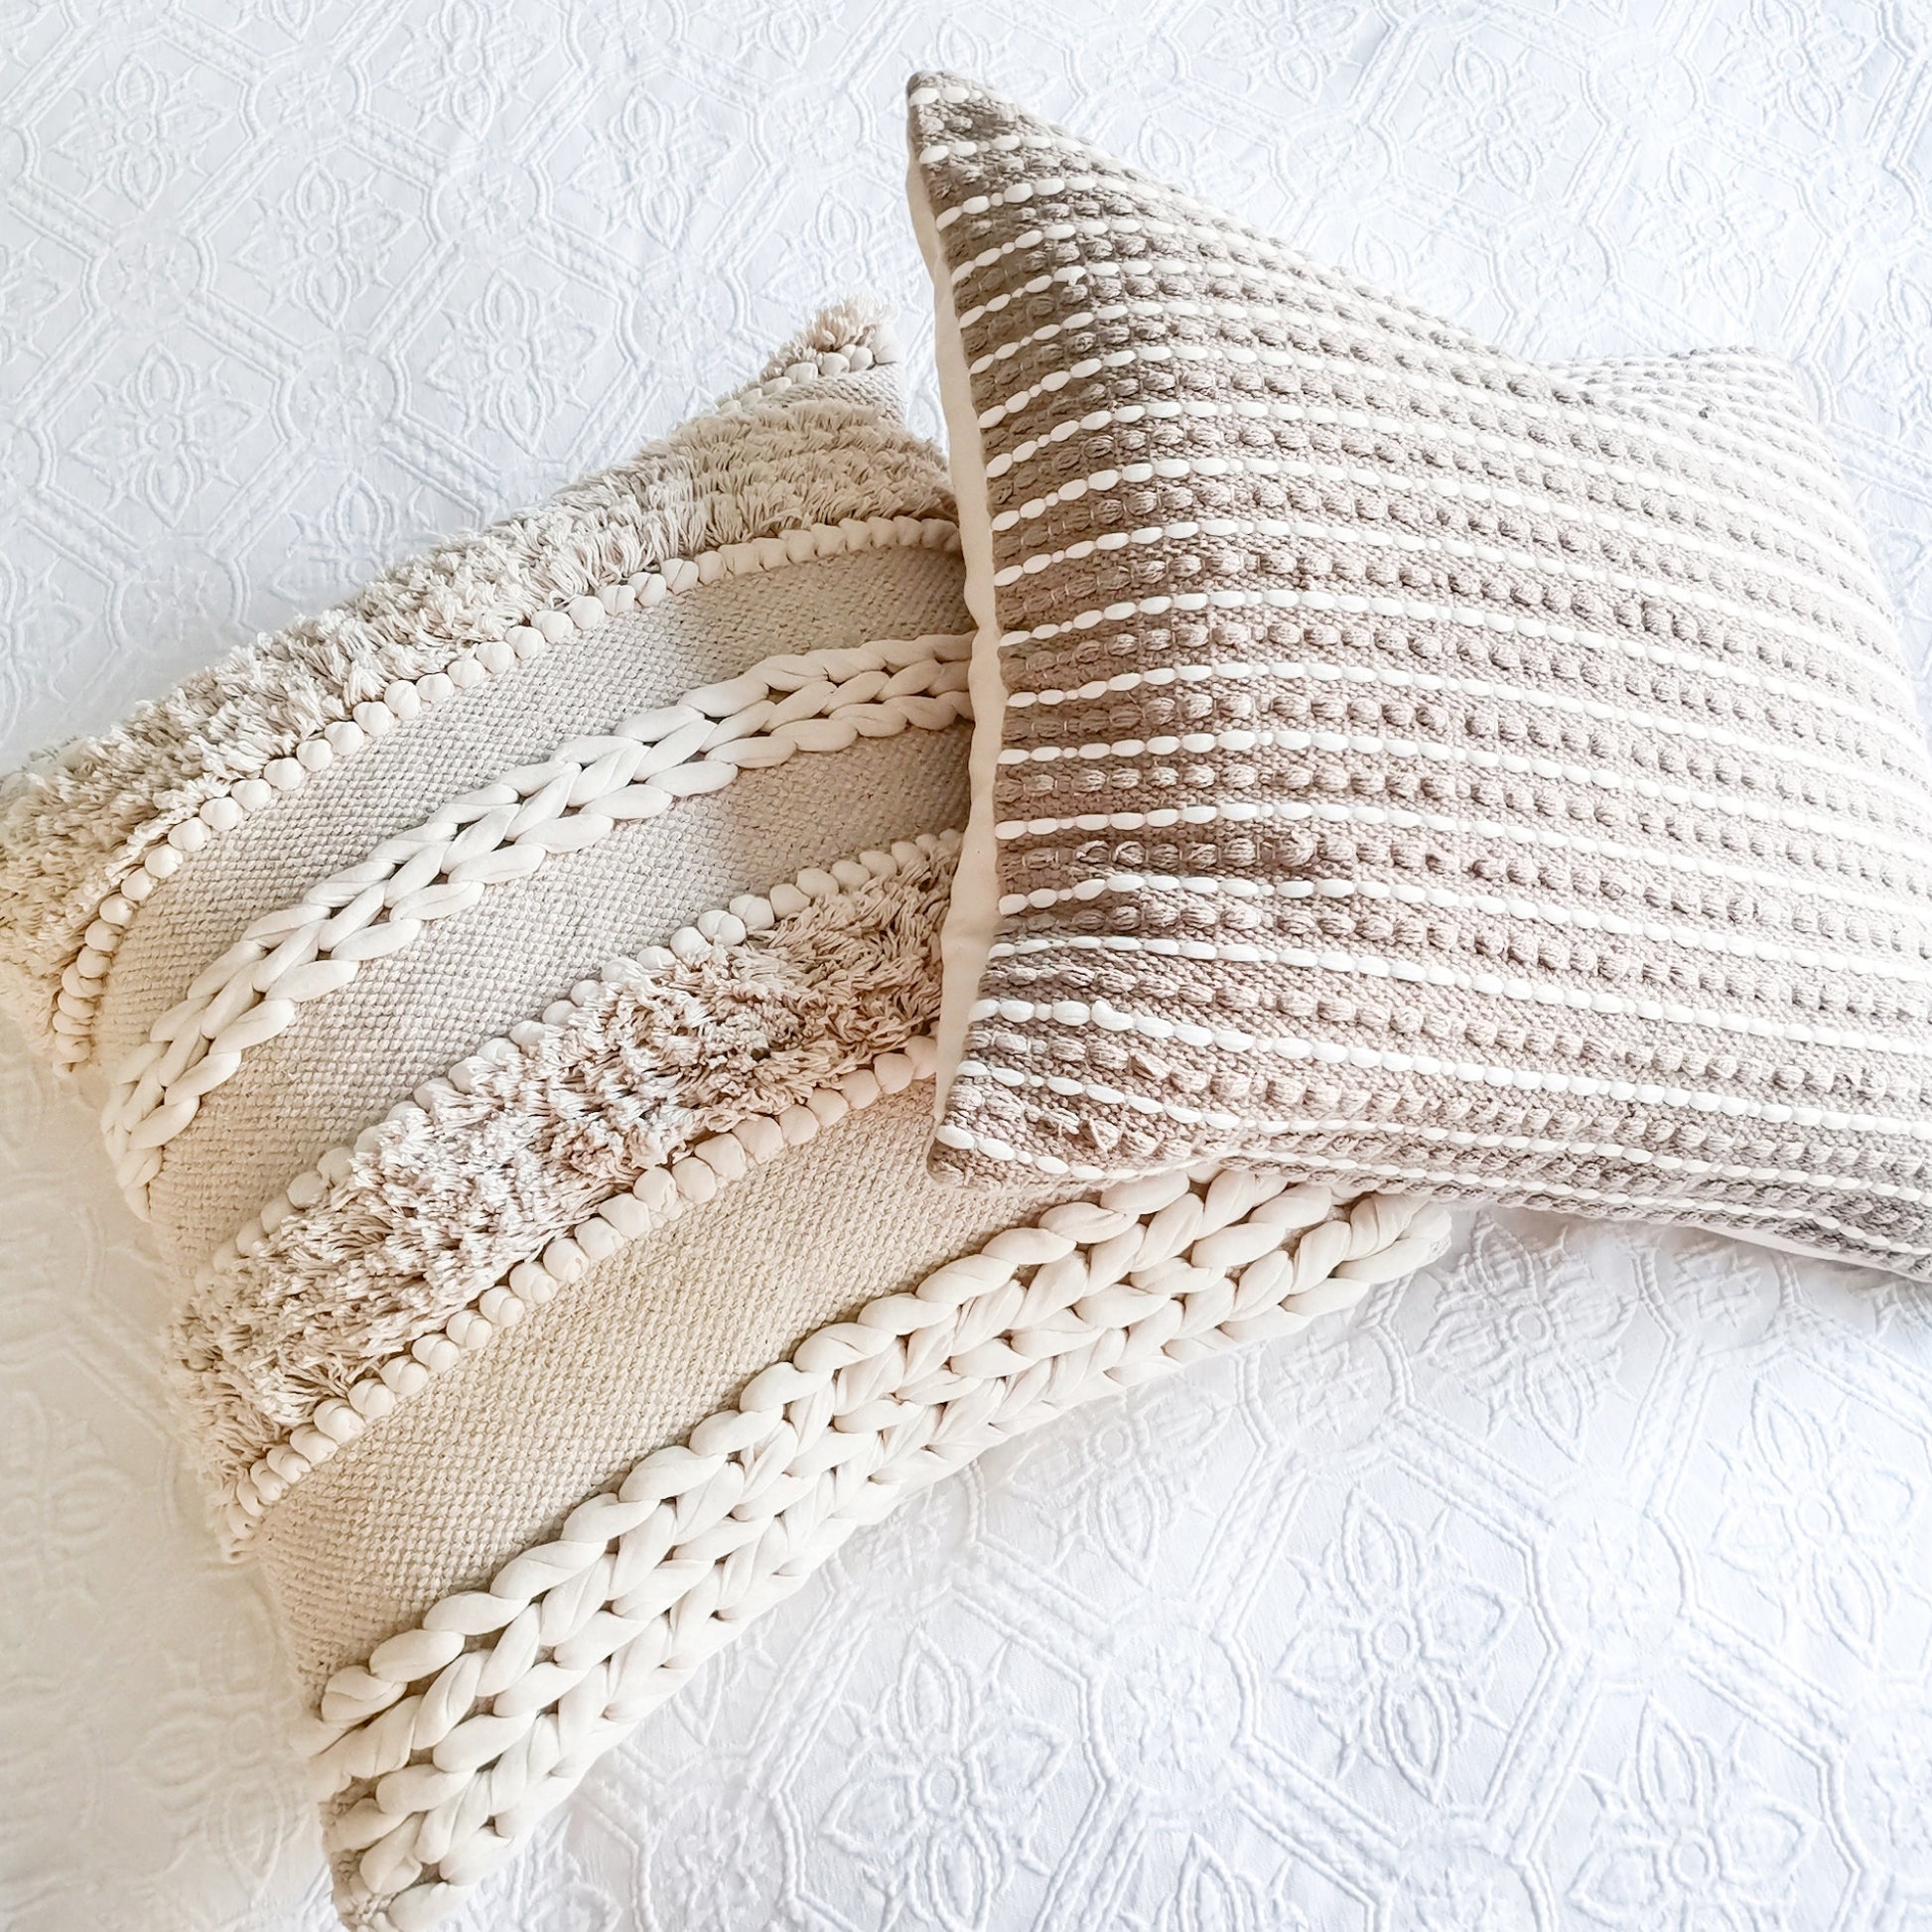 Boho pillows with stripe patterns and tufted details